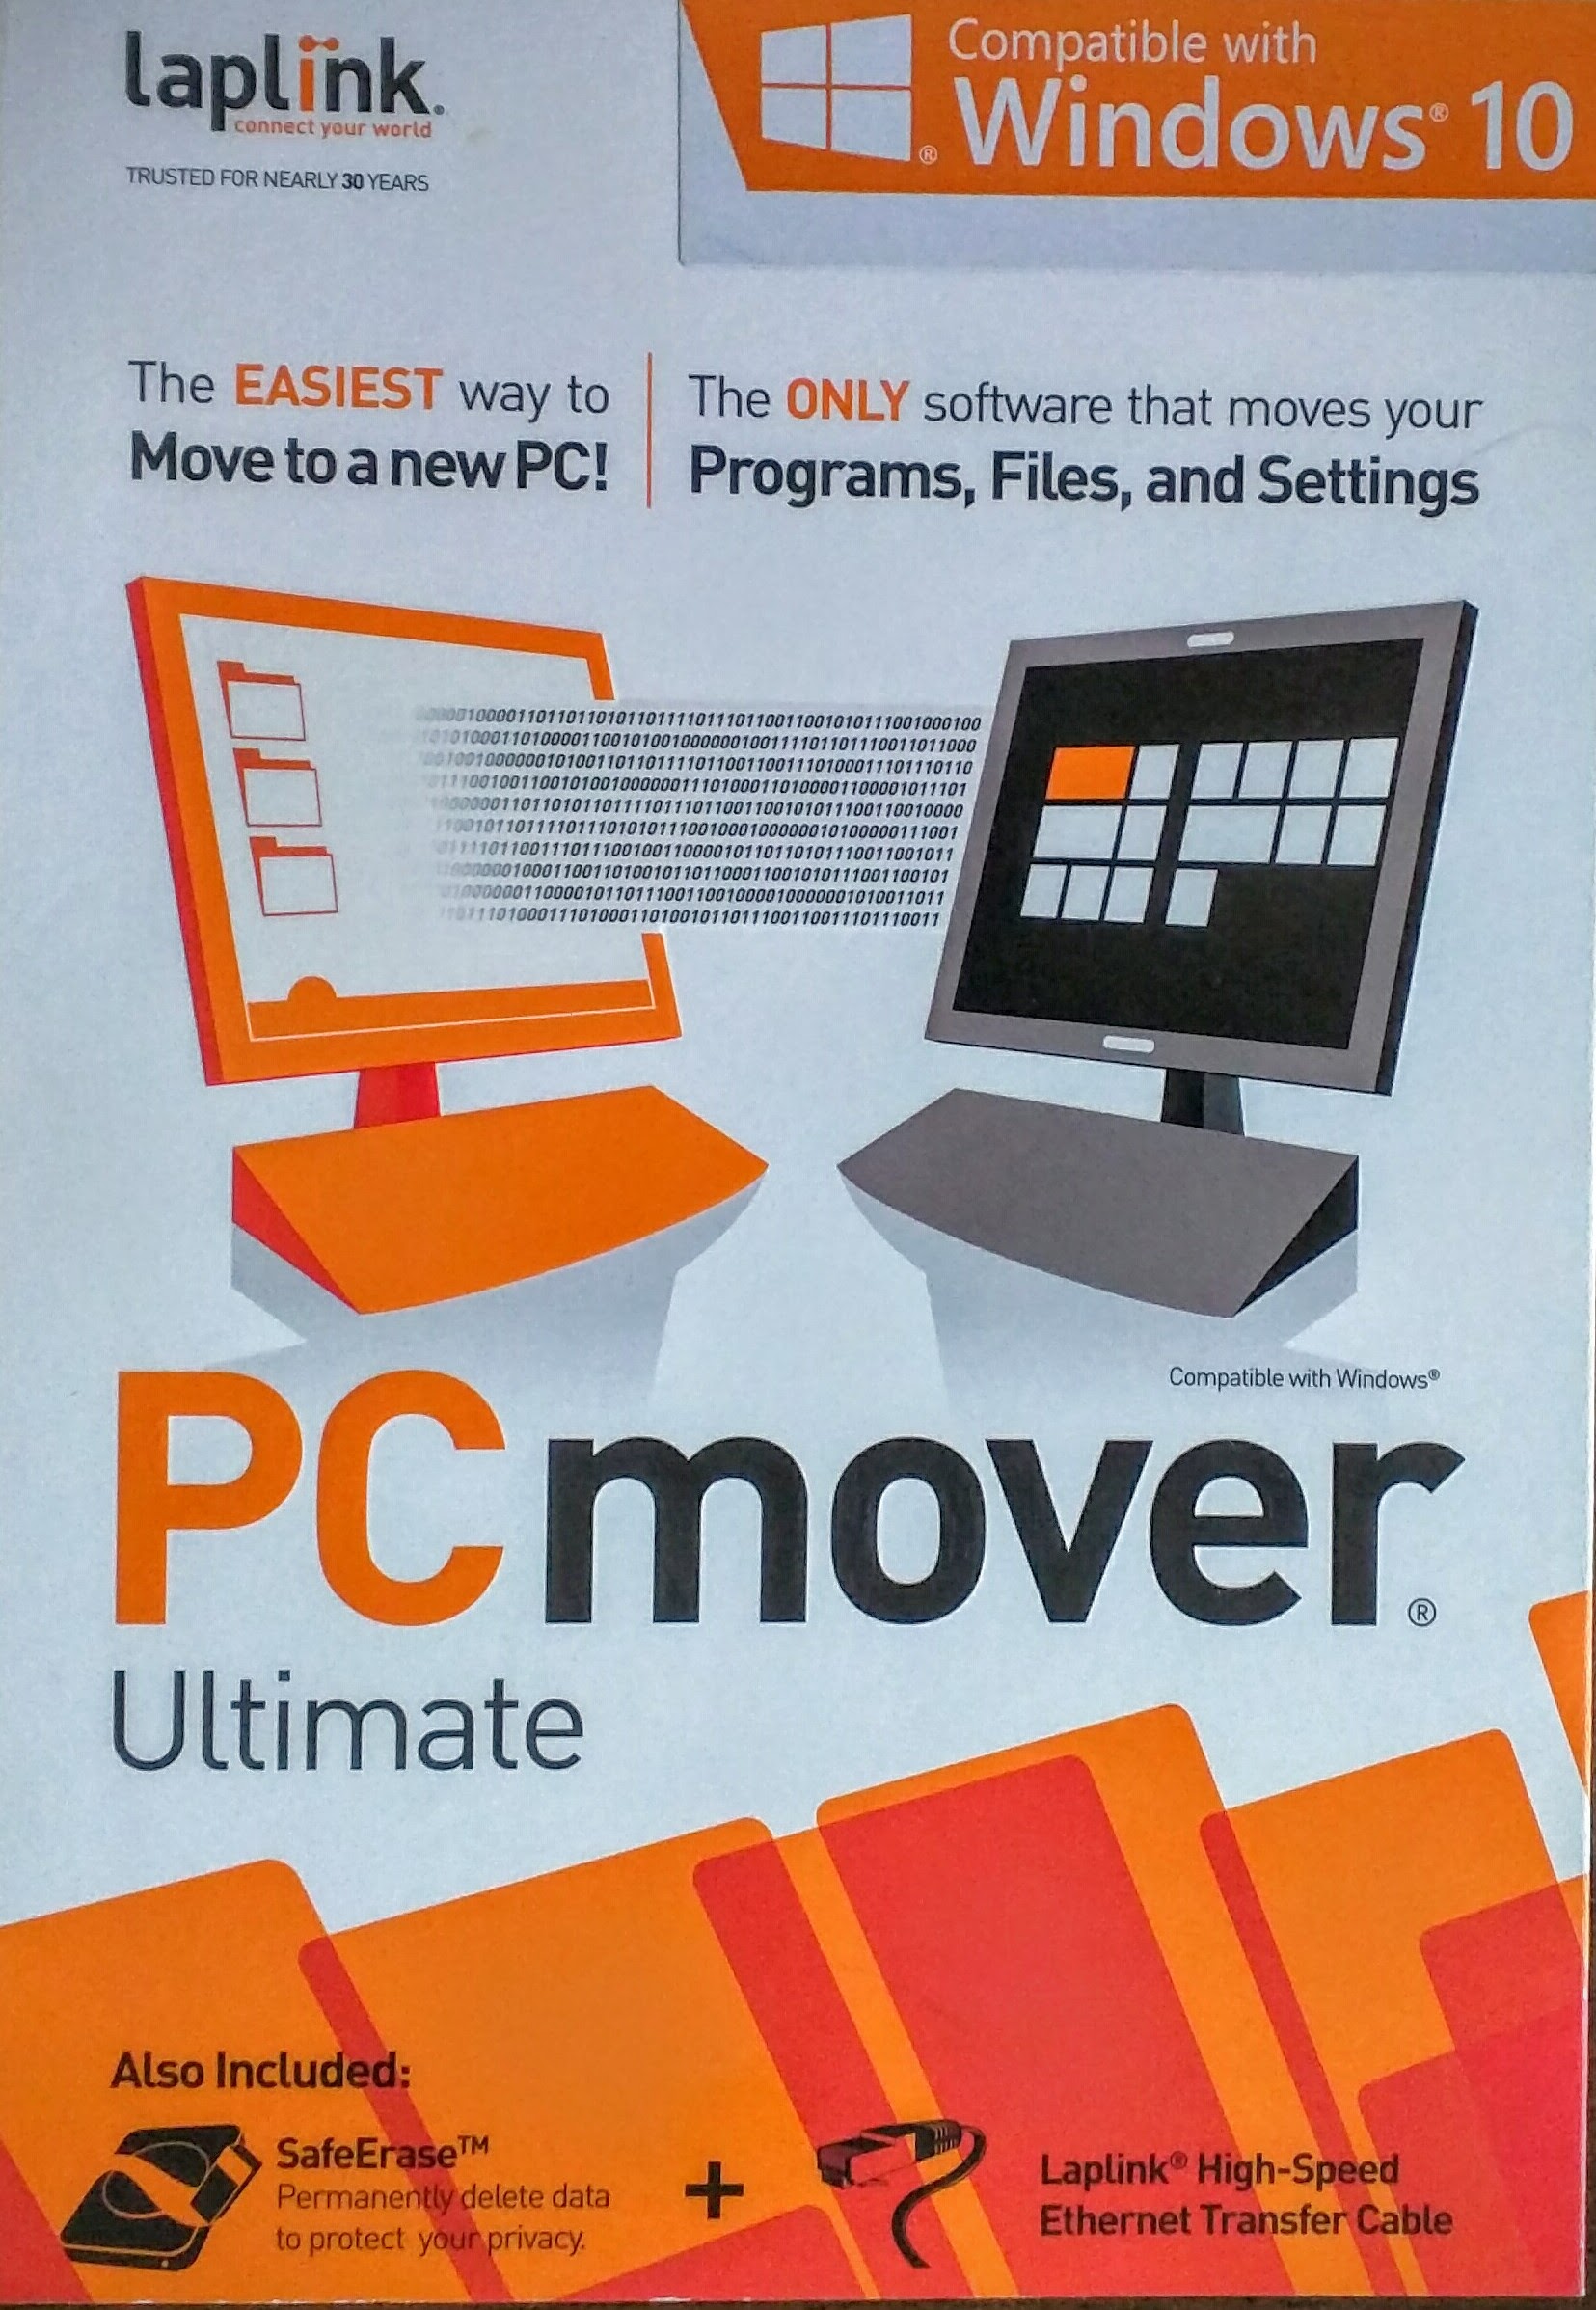 pcmover professional comparison to pcmover ultimate